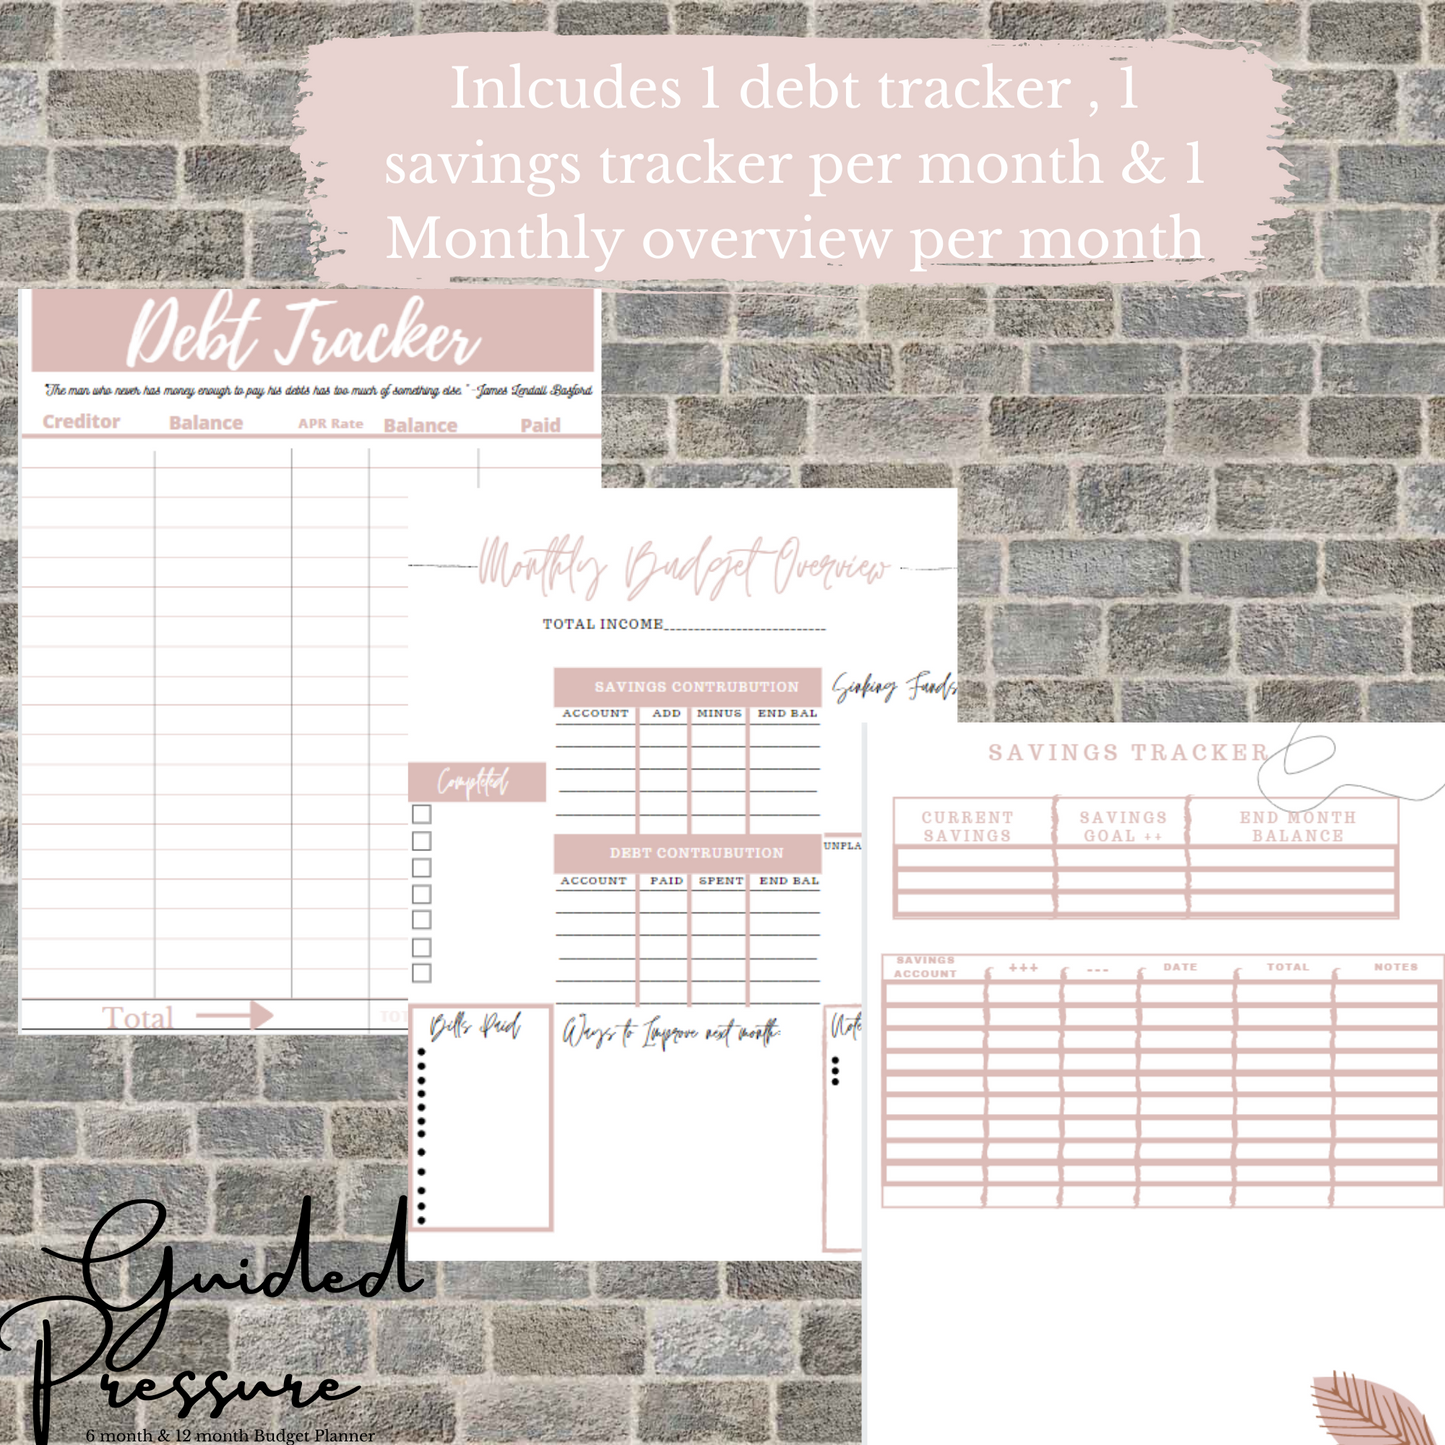 6 Month Pink Paycheck To Paycheck Digital Budget Planner Printable 8.5x11